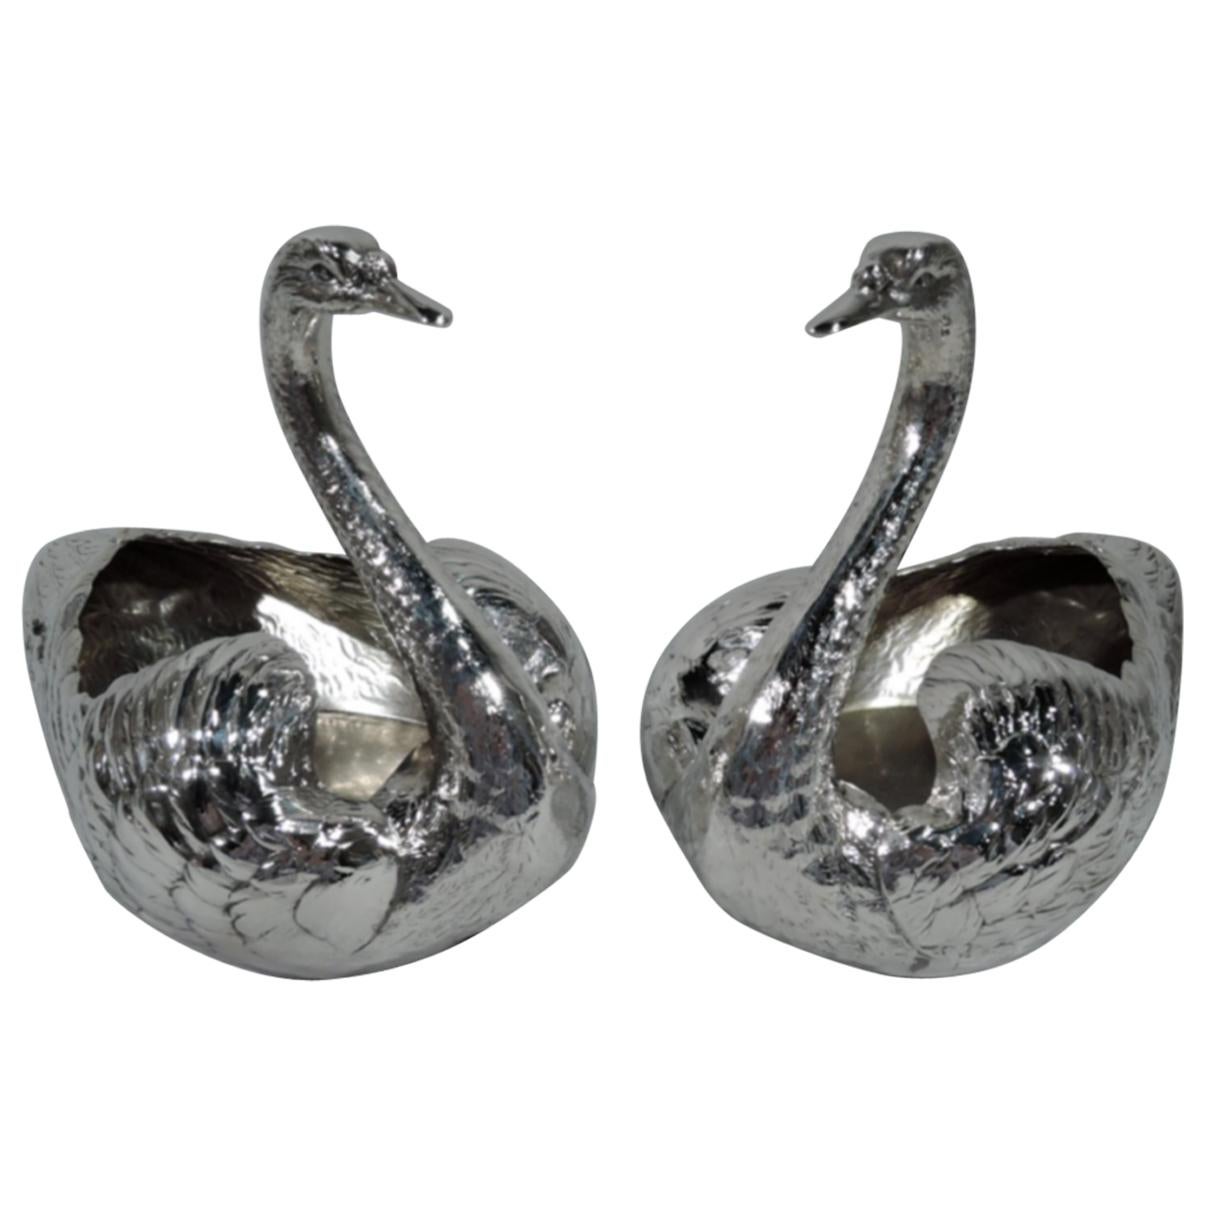 Pair of Antique American Sterling Silver Swans by Gorham